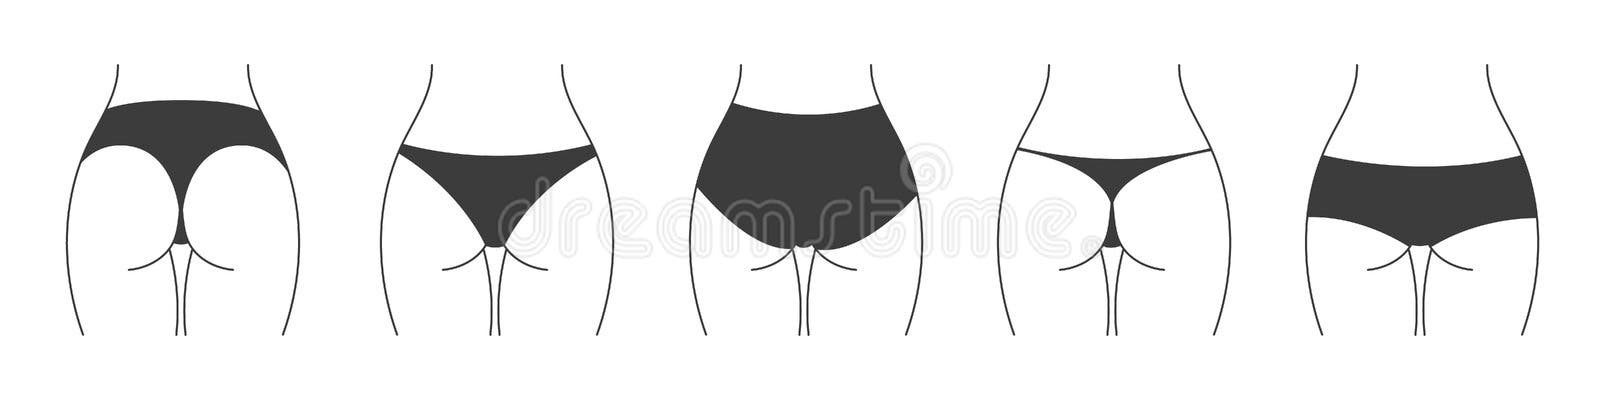 Different Types of Panties. Collection of Lingerie Back View Stock Vector -  Illustration of curve, panties: 220707231